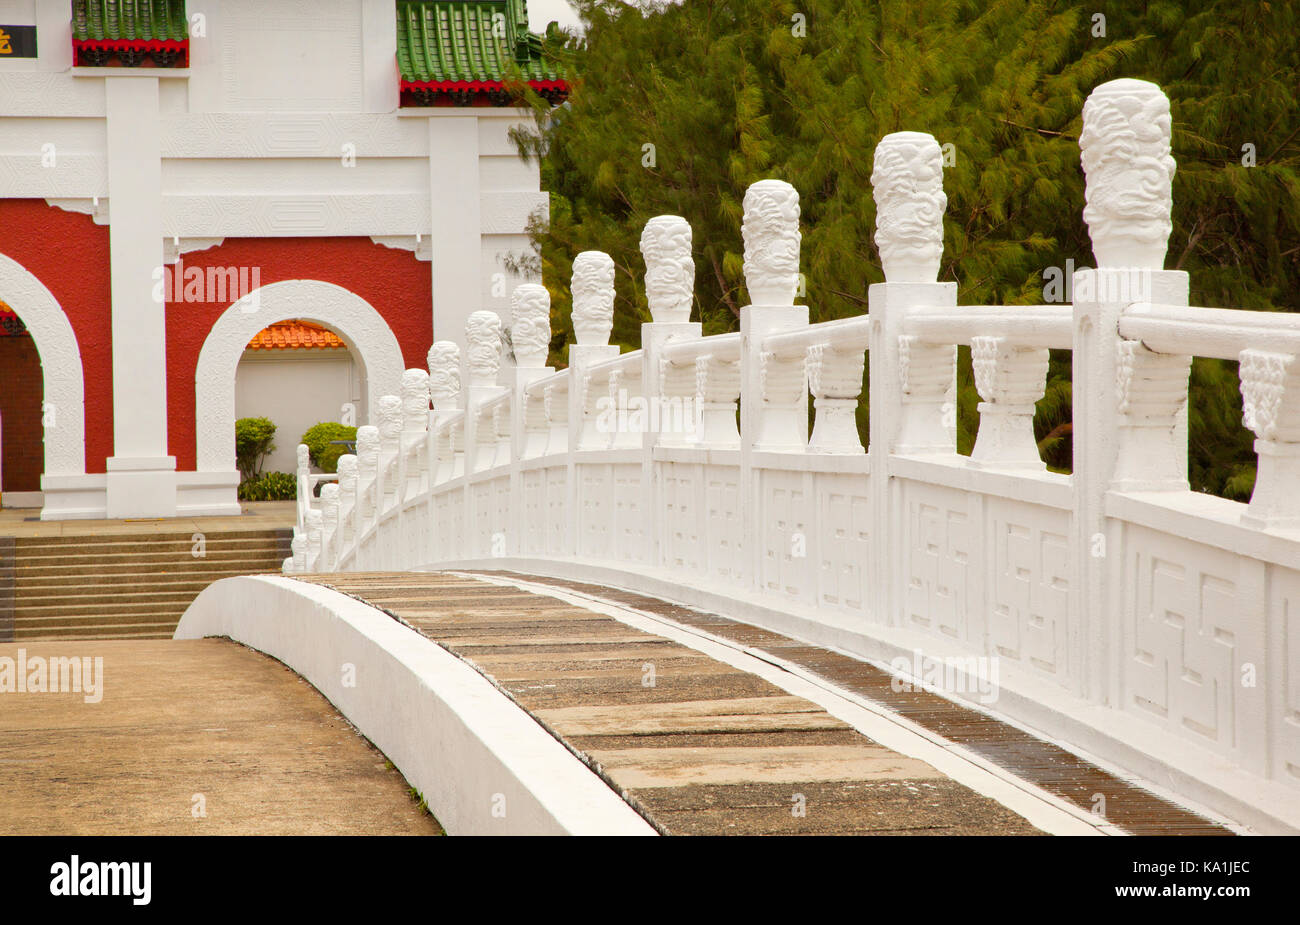 Singapore, Chinese Garden, bridge detail, Built in 1975 by the JTC Corporation and designed by Prof. Yuen-chen Yu, an architect from Taiwan. Stock Photo